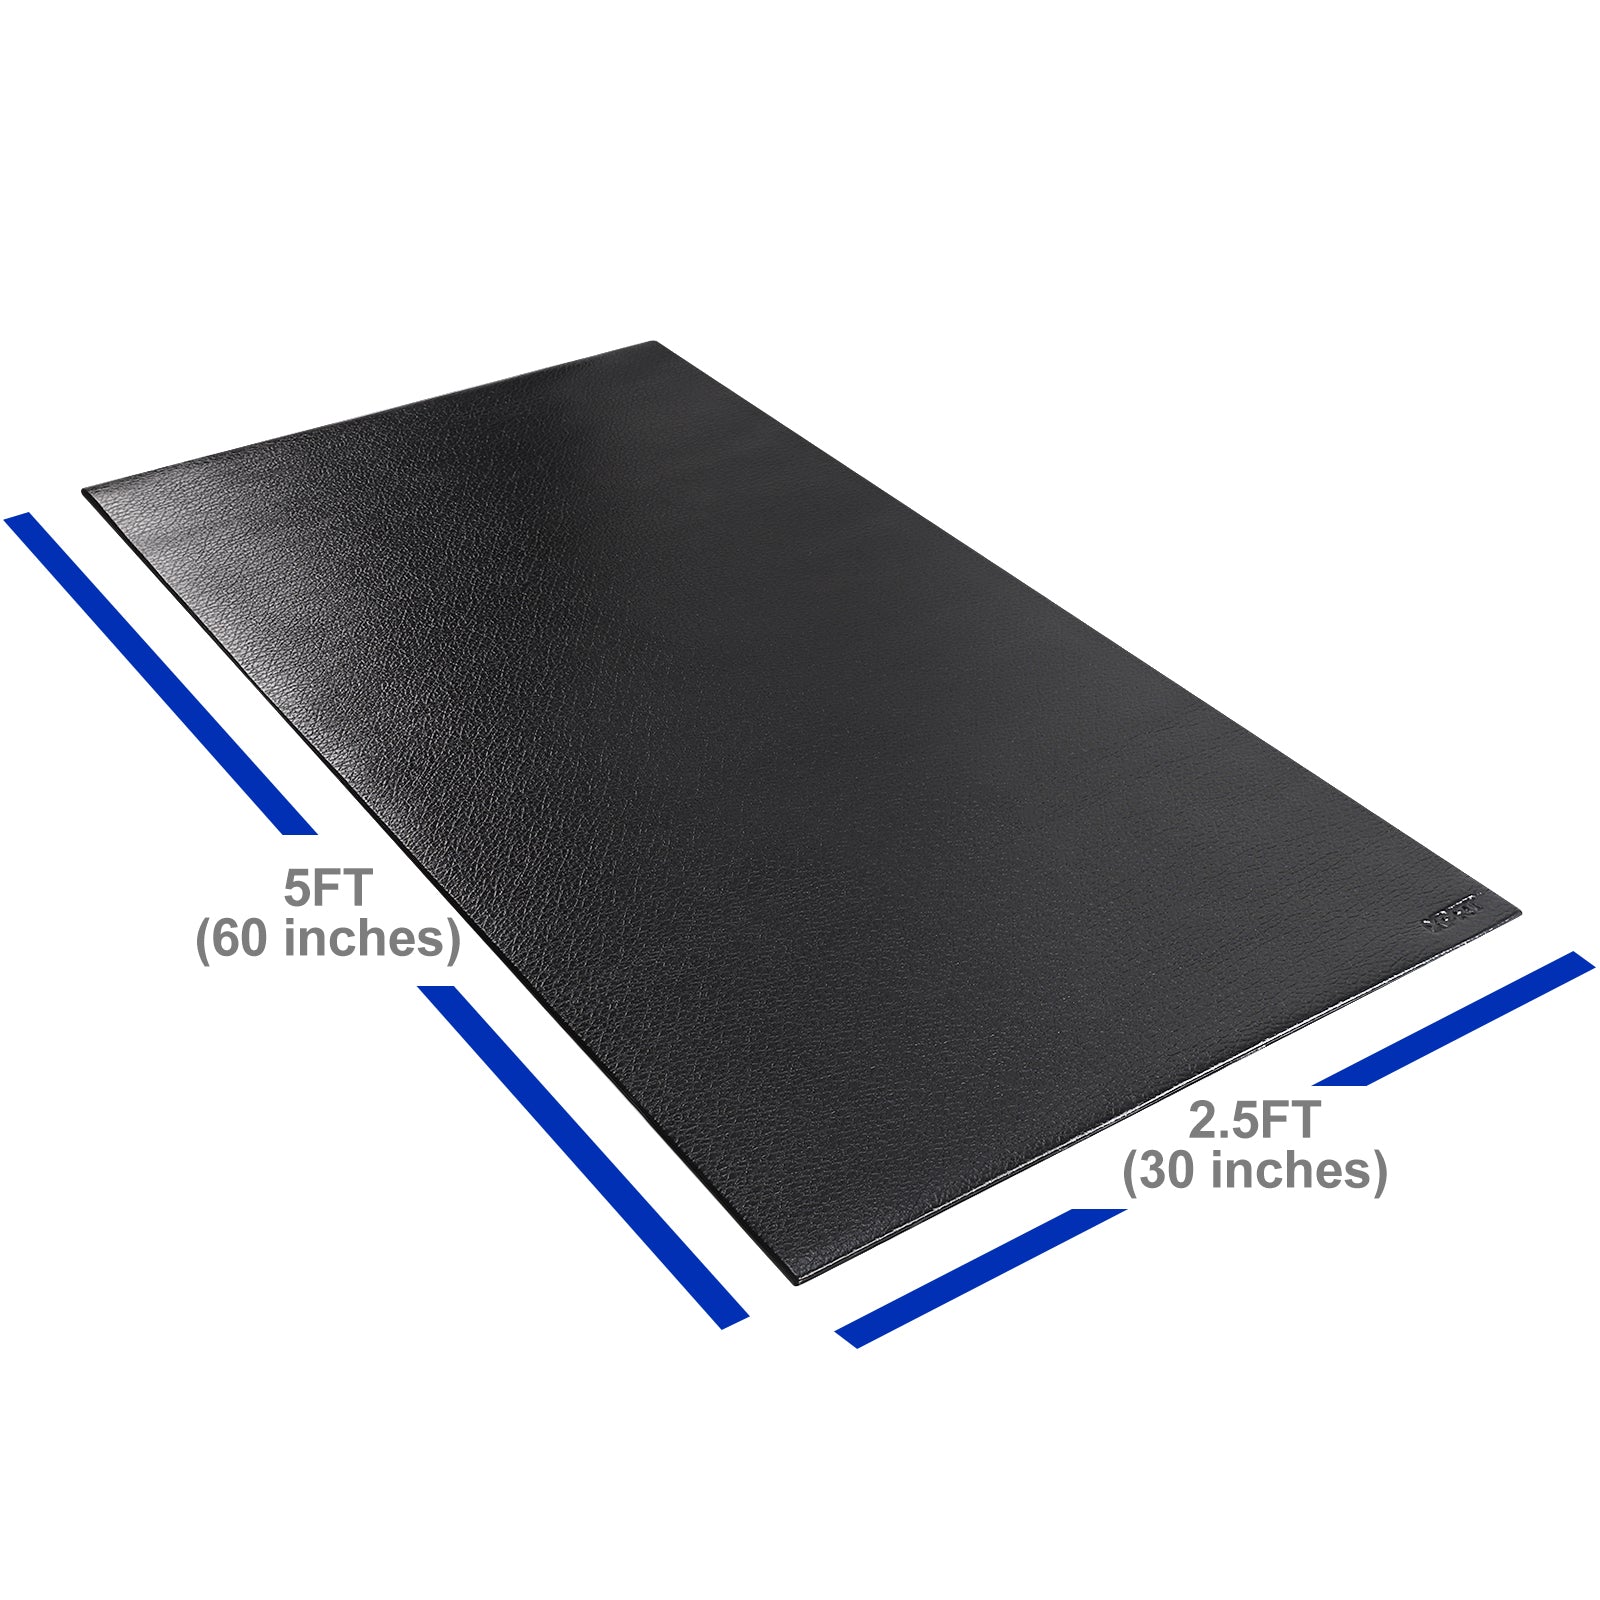 XPRT Fitness 1/2 In. Thick Interlocking Foam Floor Mat Exercise